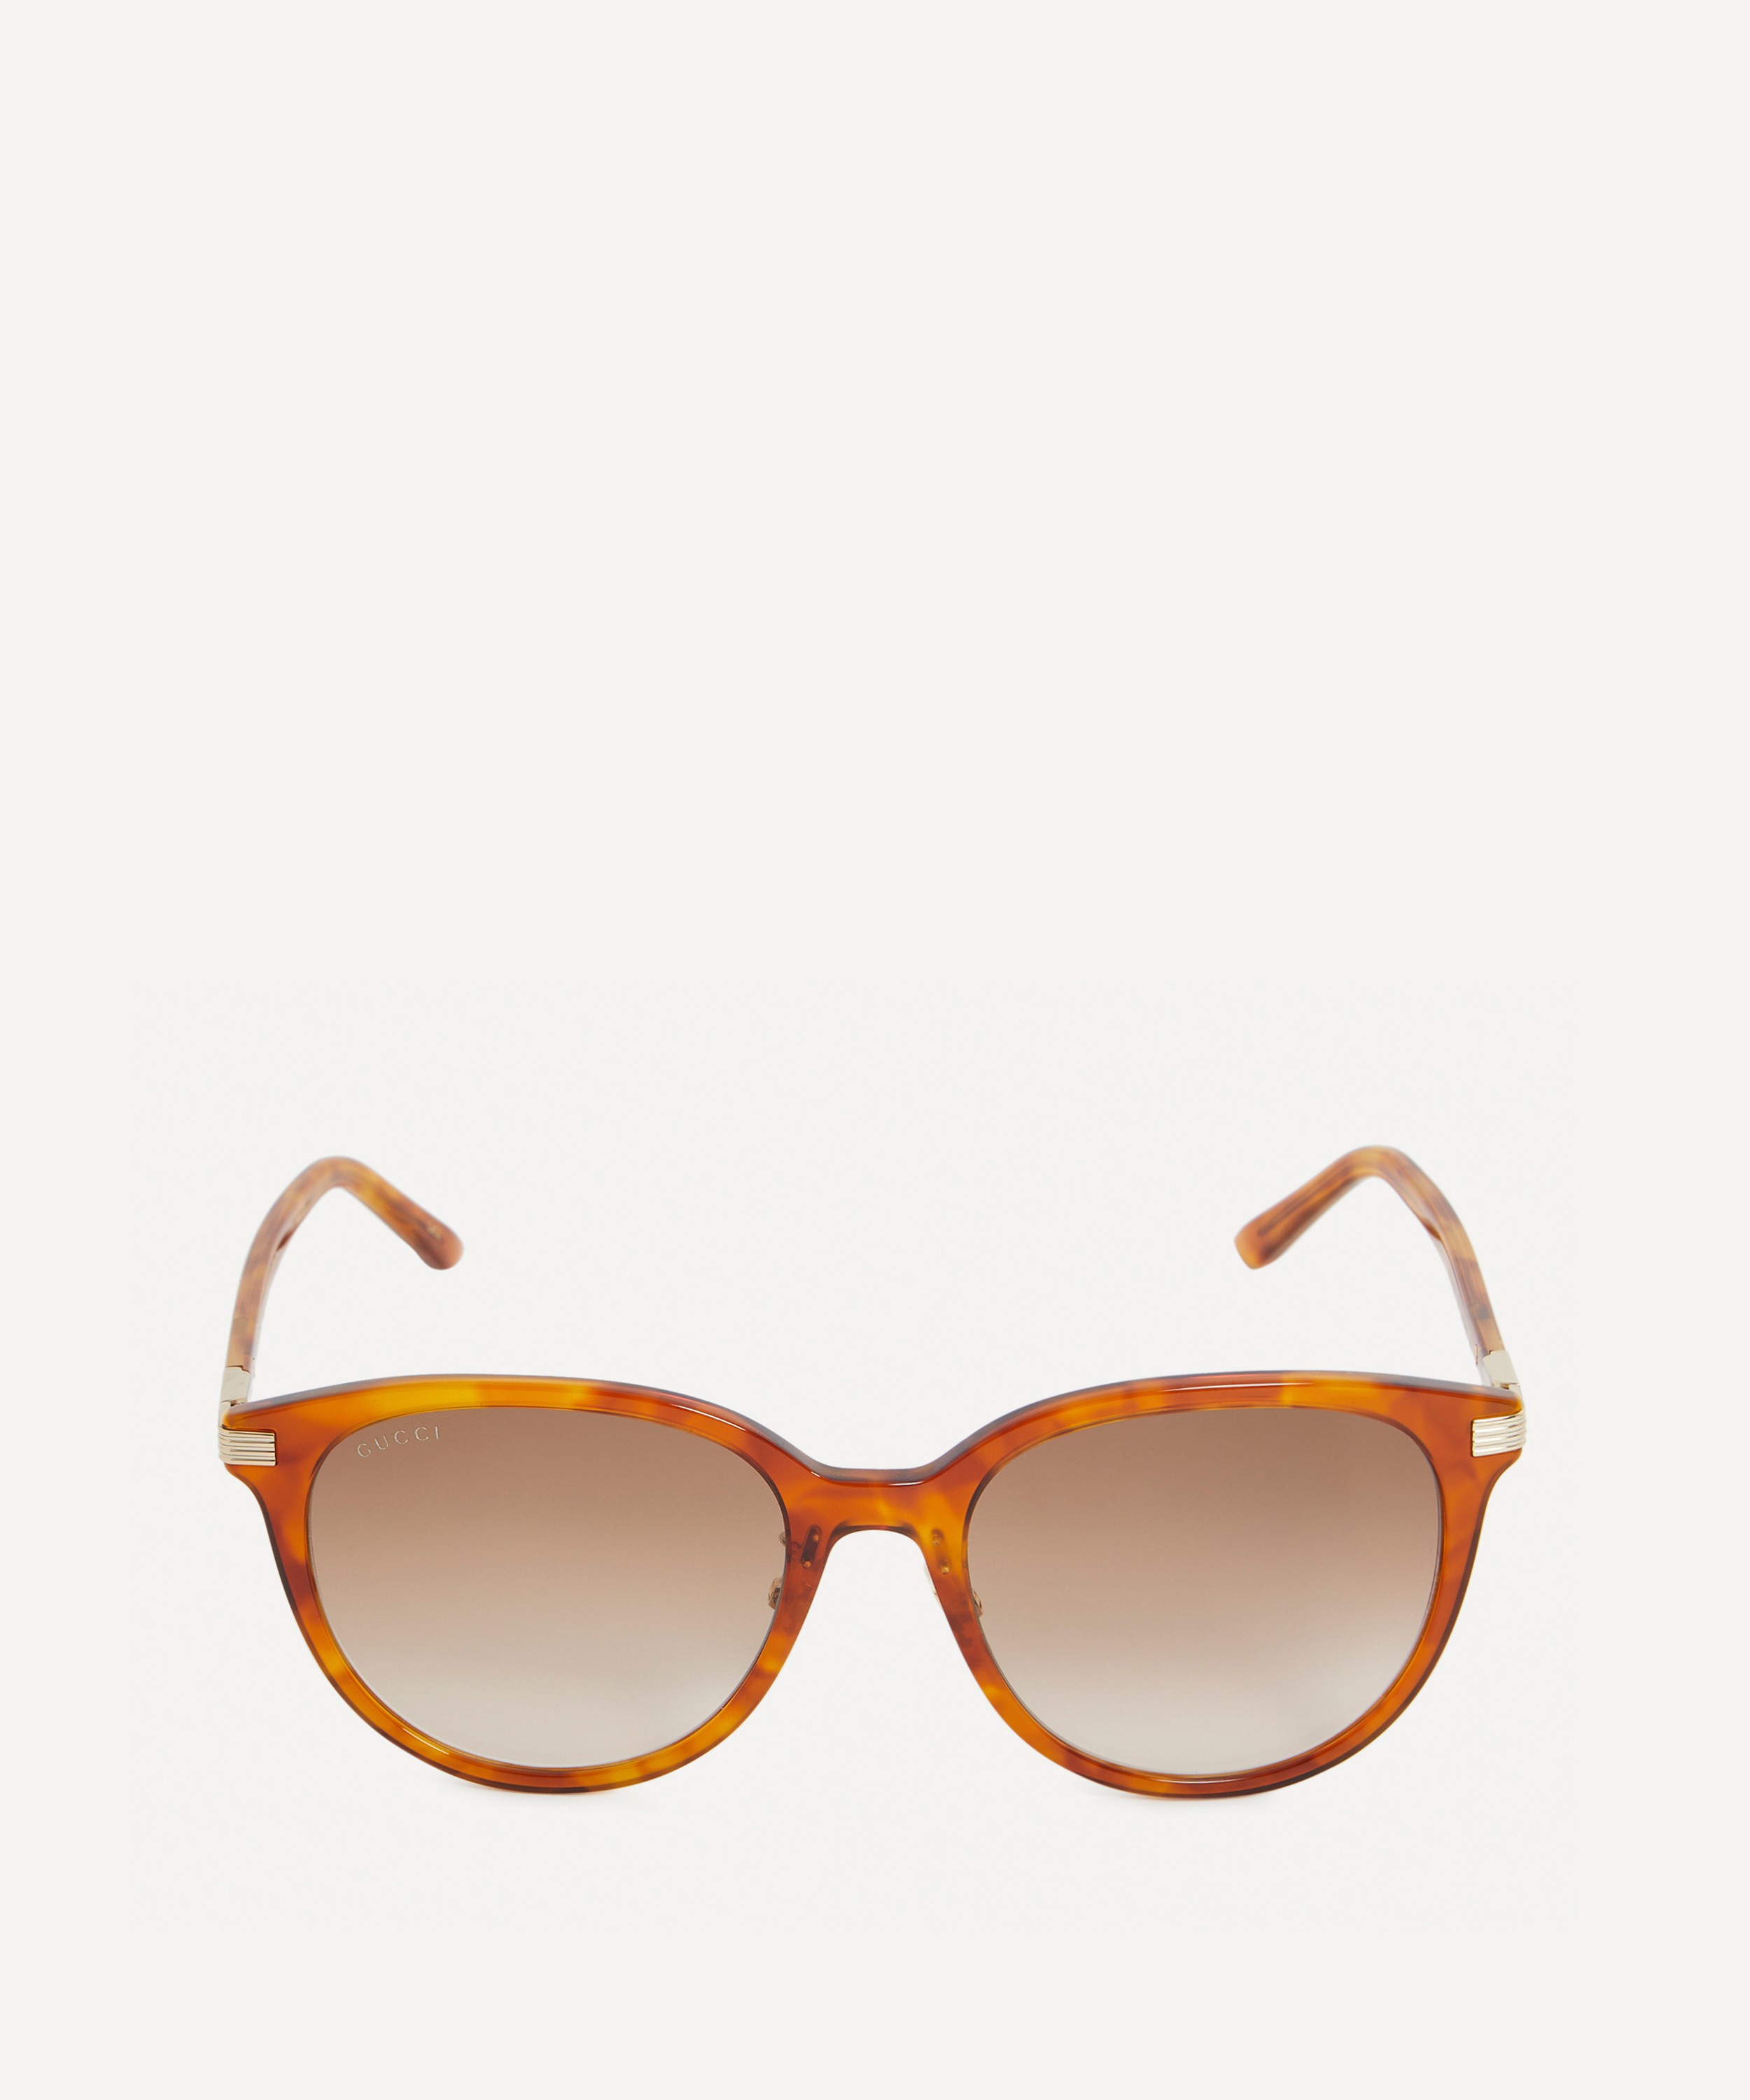 Gucci - Round Sunglasses image number 0